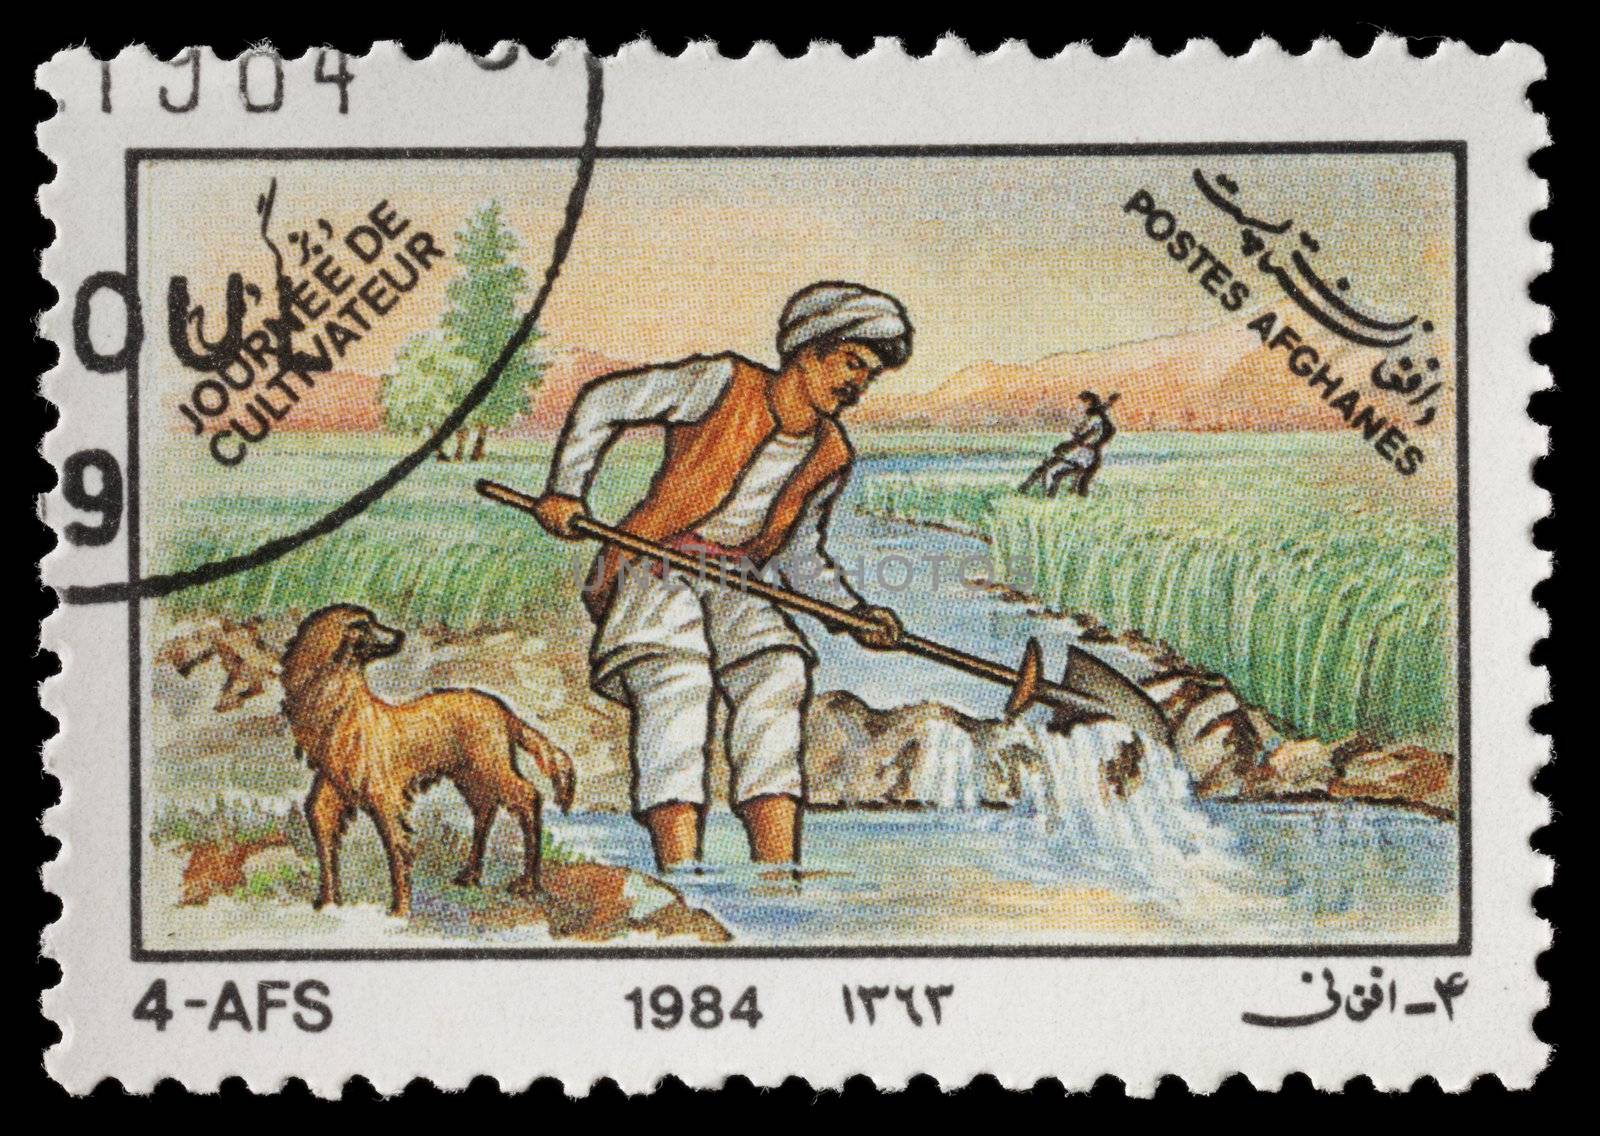 AFGHANISTAN - CIRCA 1984: A Stamp depicting agricultural activities. circa 1984 in Afghanistan.